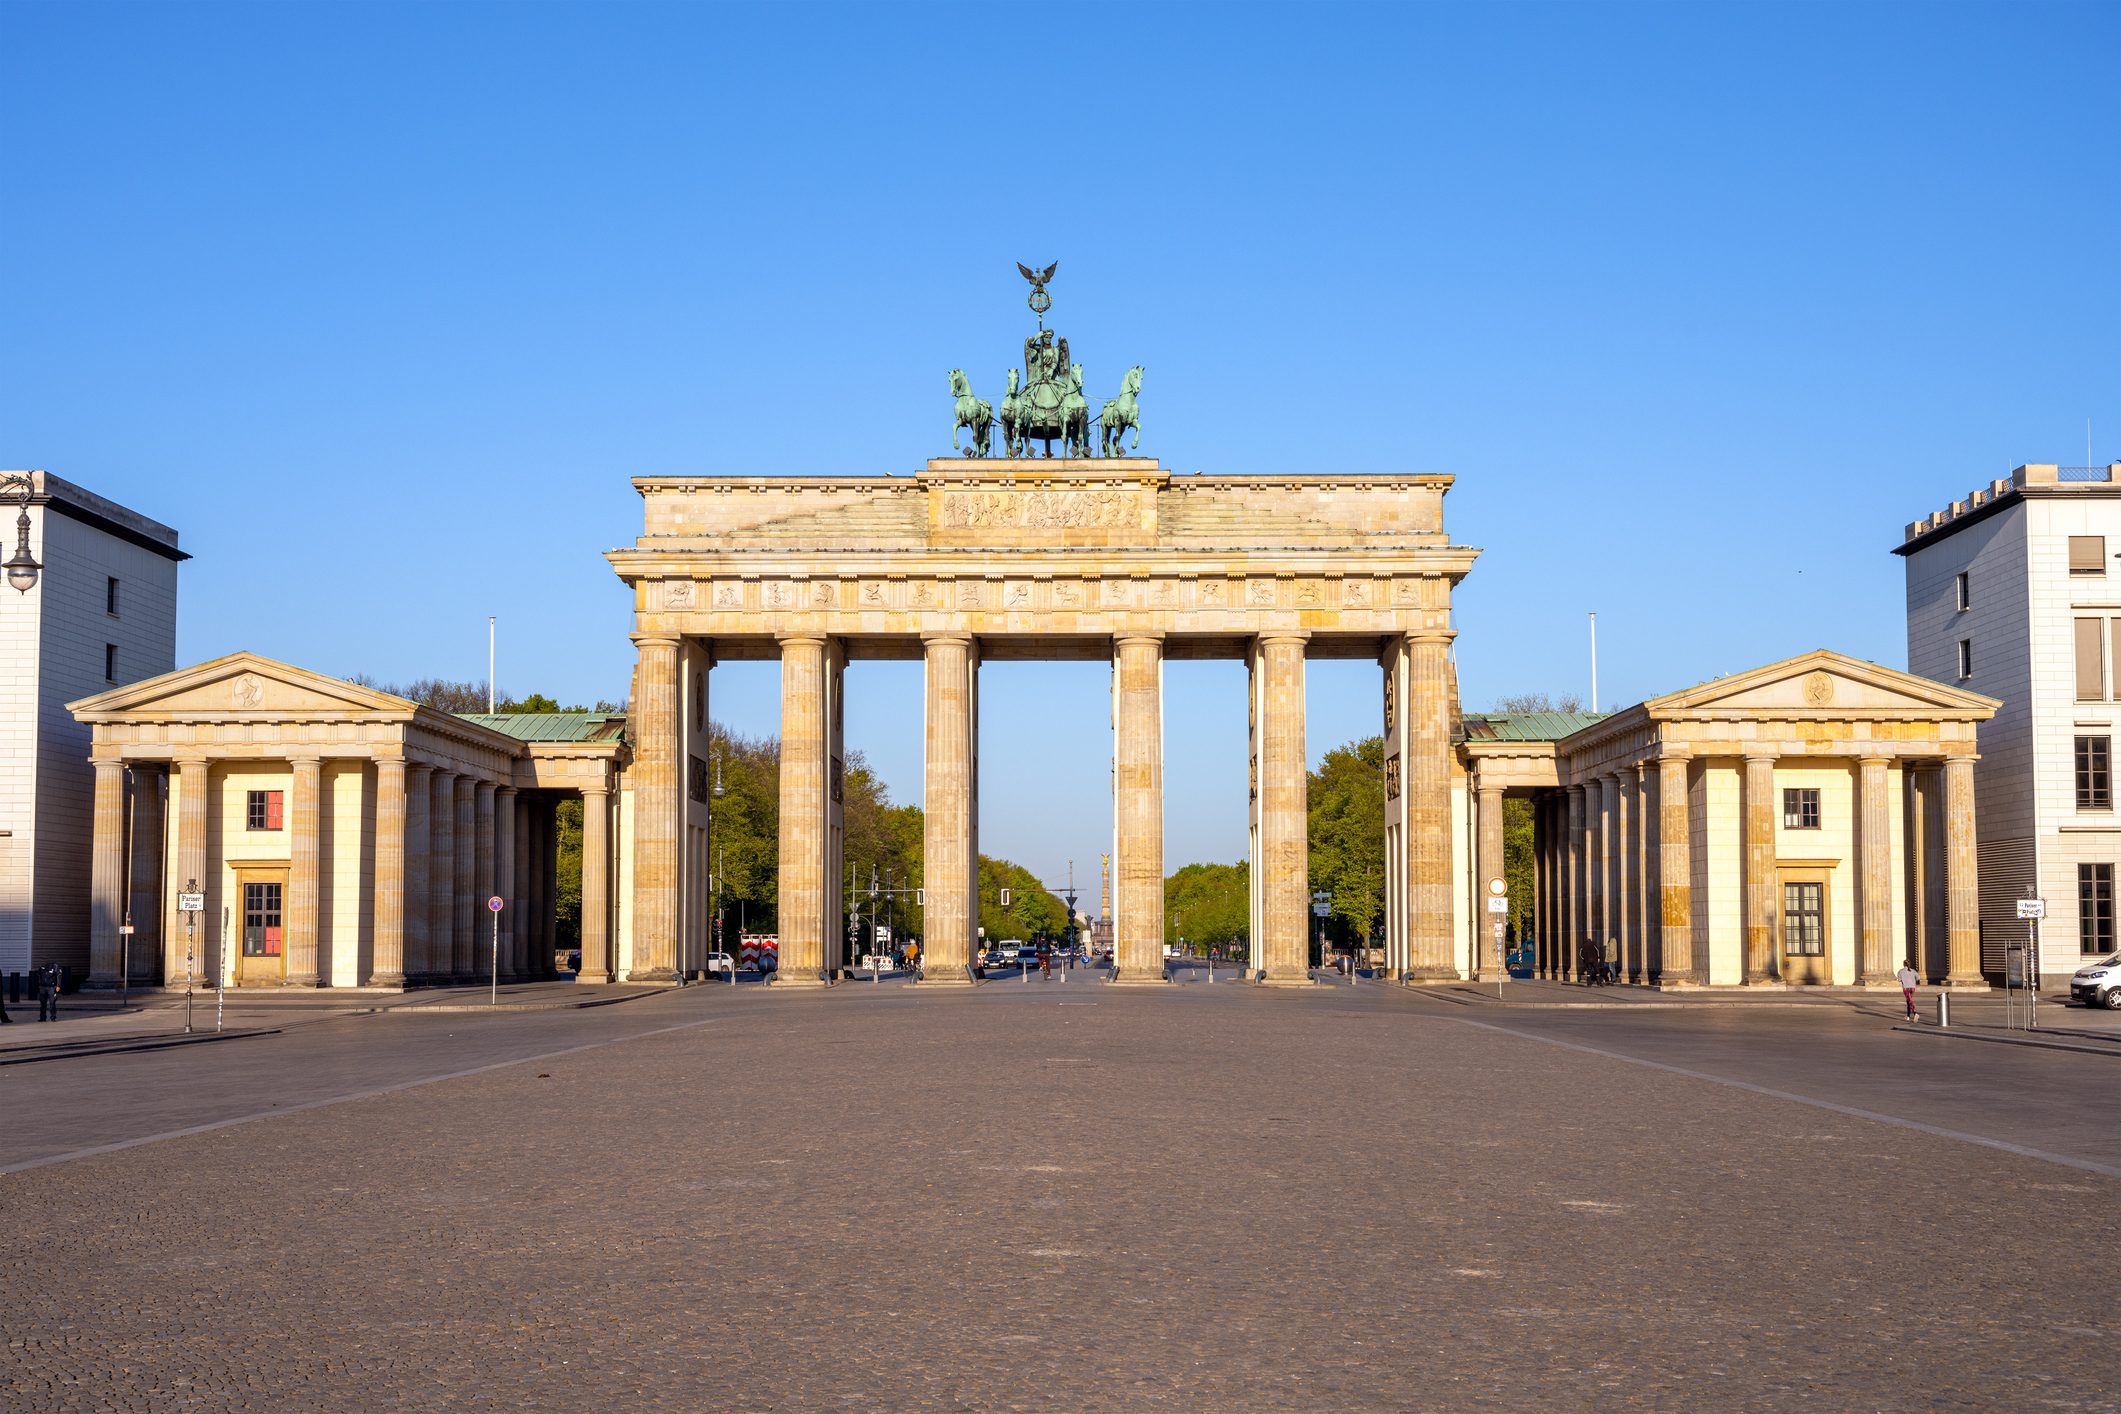 <p class=""><strong>Best for: </strong>Museums</p> <p>A dynamic and modern metropolis, Berlin draws travelers from all corners of the globe to experience its modern arts, nightlife and historic cultural sites, including Museum Island (five <a href="https://www.rd.com/list/most-popular-museums/" rel="noopener noreferrer">popular museums</a> on a Spree River island) and the Brandenburg Gate. Reminders of the city's complicated past—including the graffitied remnants of the Berlin Wall—are ever-present and absolutely worth visiting. Want to experience a different side of Berlin? Go gallery hopping, eat street food at Markthalle Neun, wander through the diverse Kreuzberg neighborhood or see a burlesque show. And don't worry about aging out of Berlin; the InsureMyTrip survey found that the city has one of the highest average ages (48) in the world; only Tokyo ranked higher, with an average age of 49.</p> <p class="listicle-page__cta-button-shop"><a class="shop-btn" href="https://www.tripadvisor.com/AttractionProductReview-g187323-d11452024-Explore_Berlin_Top_Attractions_Walking_Tour-Berlin.html">Book a Tour</a></p>